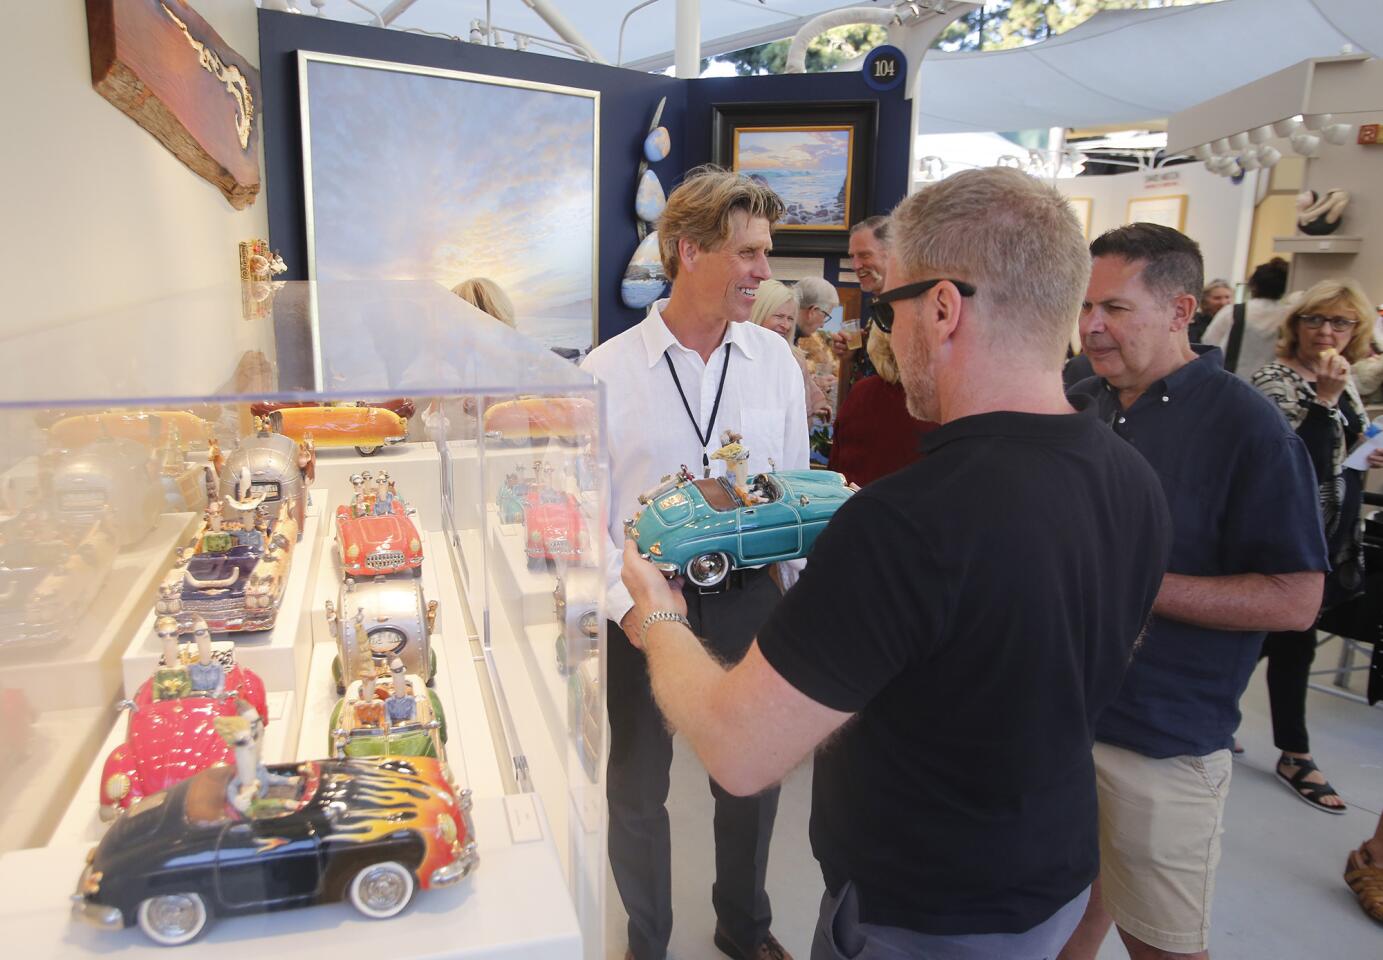 Ceramic artist Scott Schoenherr shares one of his whimsical automotive life pieces with guests during Festival of Arts artist preview party.